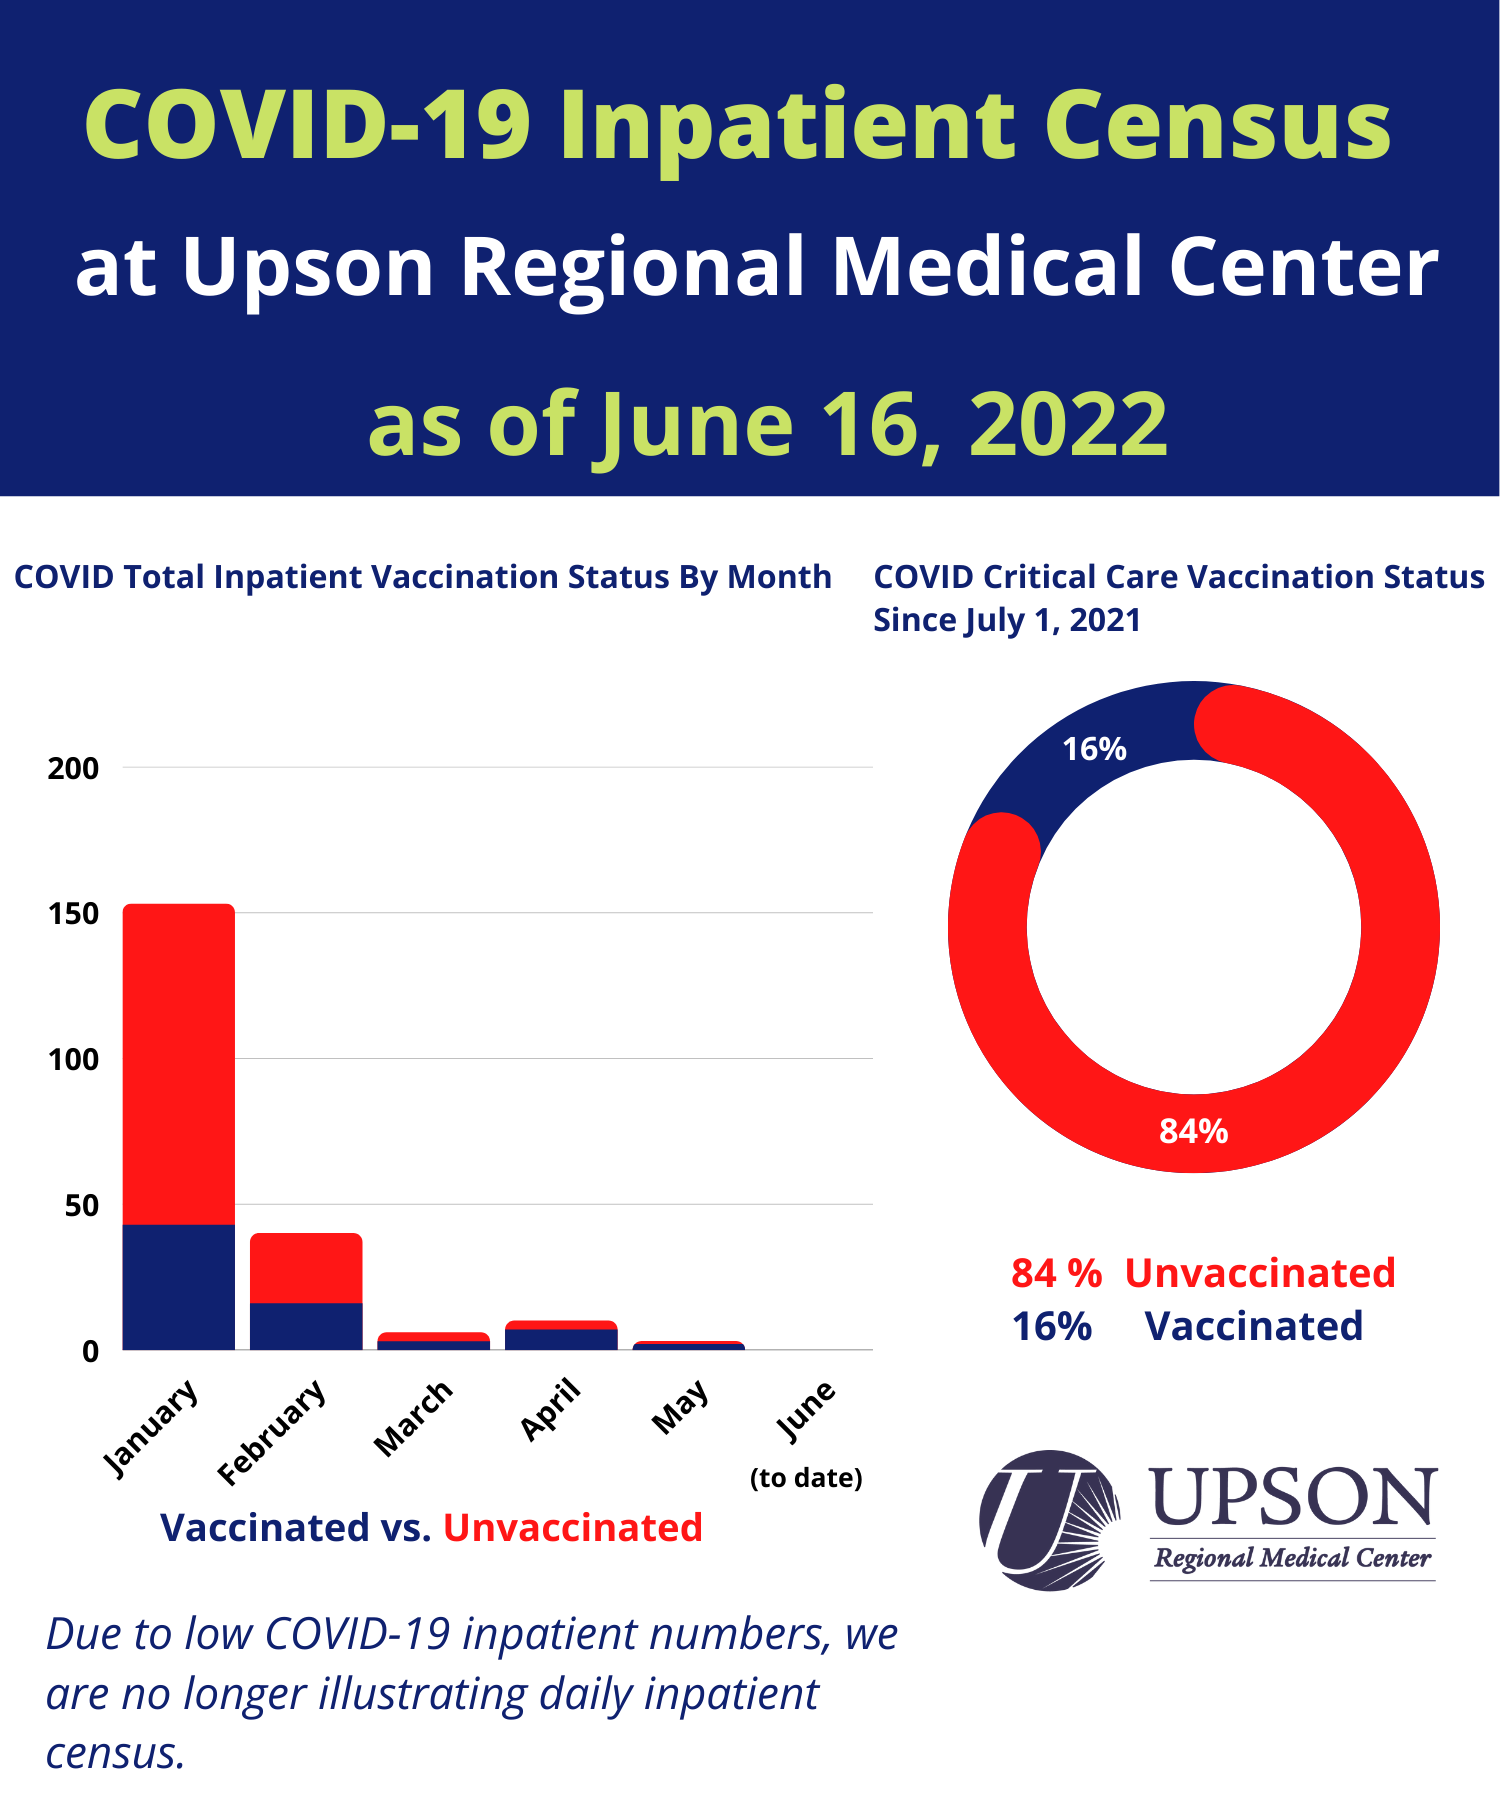 Photo for URMC COVID Inpatients as of June 16, 2022